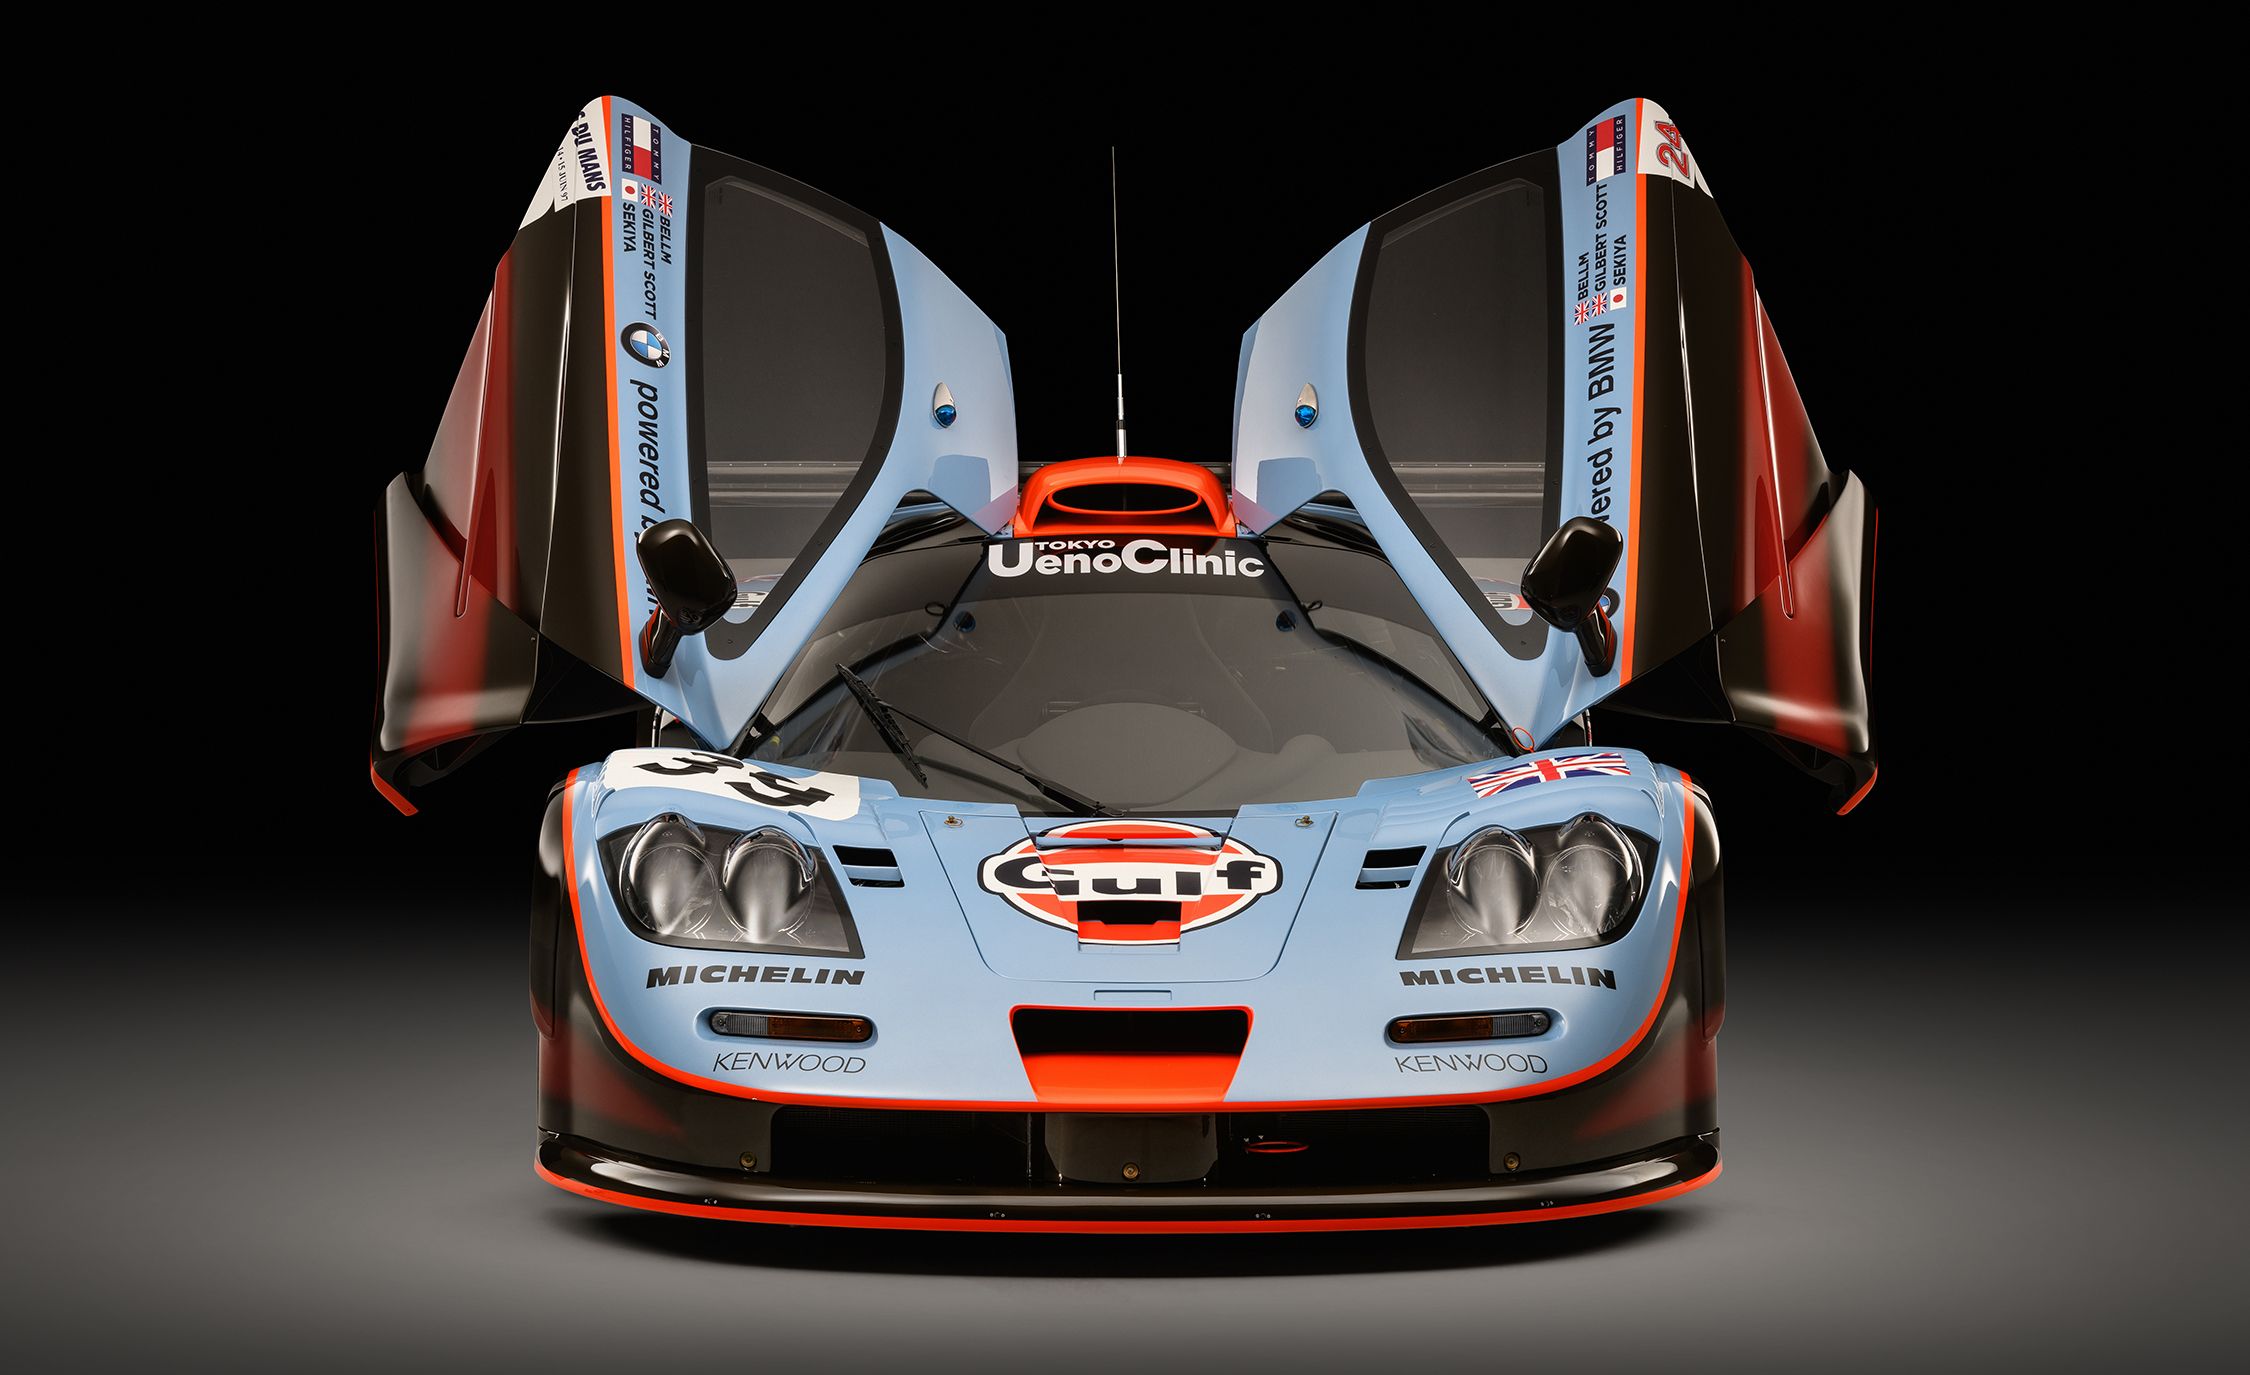 It Took Mclaren 18 Months To Painstakingly Restore This F1 Gtr To New